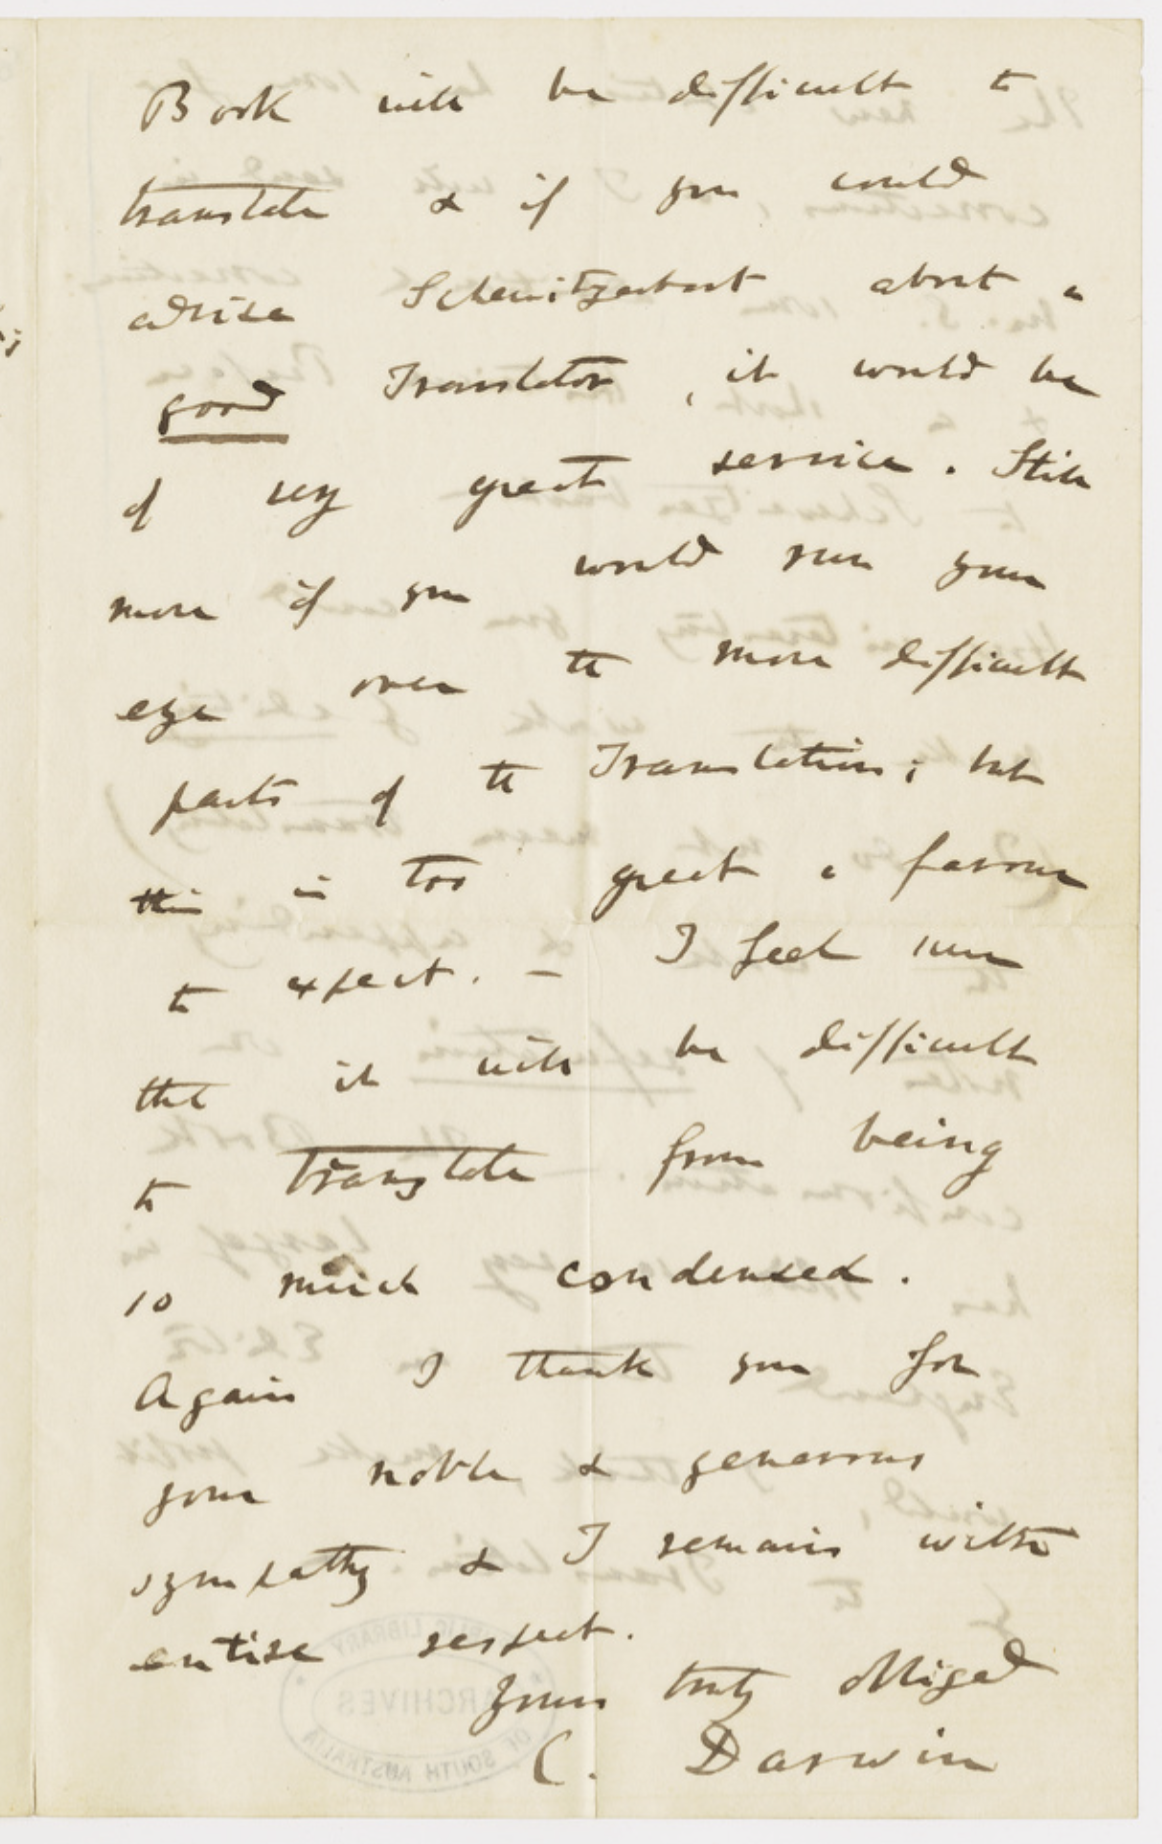 •	Letter written by Charles Darwin, Down, Bromley, Kent, England, to Dr H.G. Bronn (in Germany?) in which he discusses a possible German translation of 'Origin of Species'. SLSA: D 4639/3